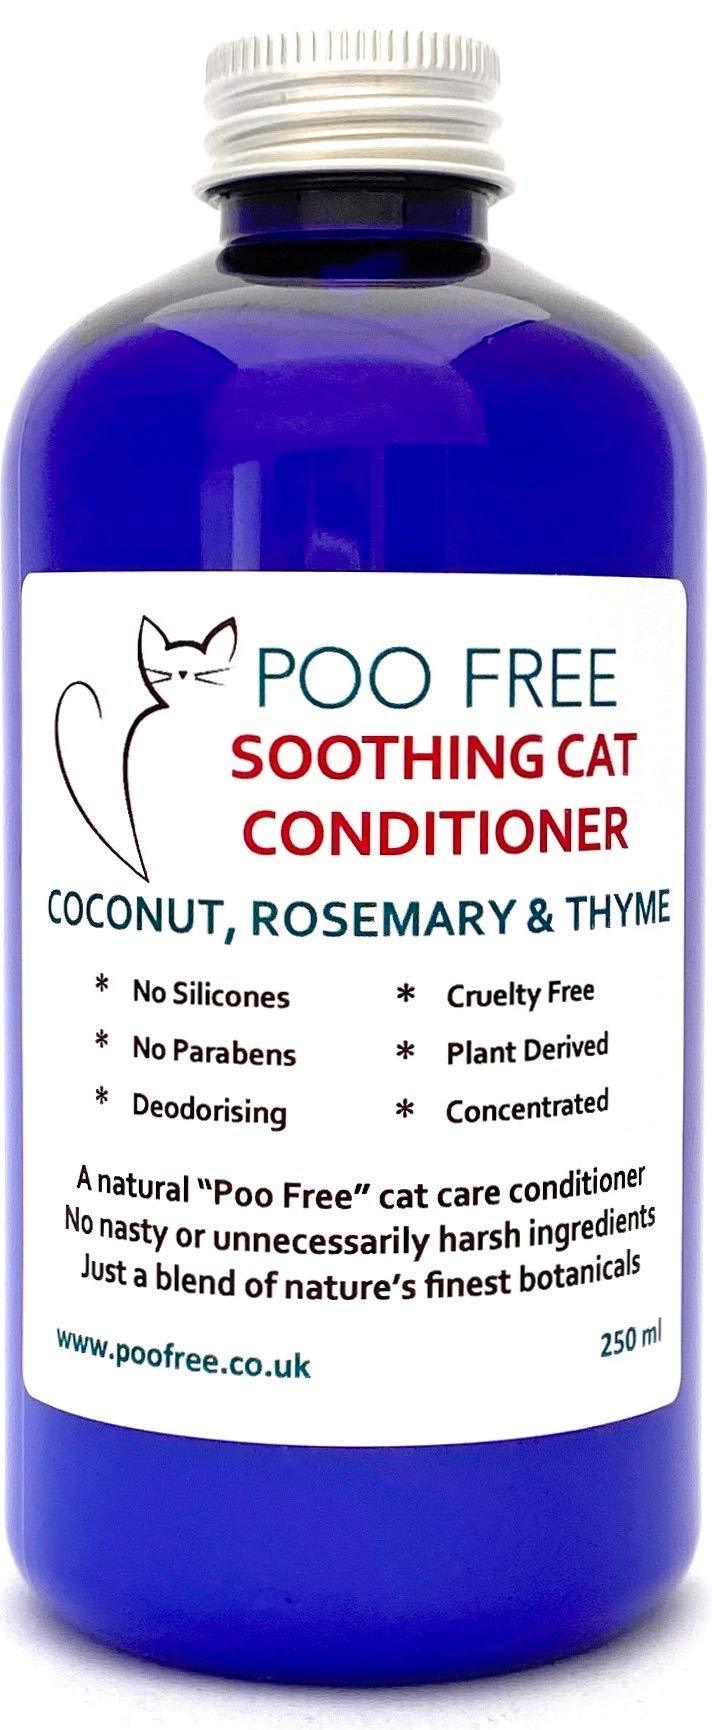 POO FREE Natural SOOTHING CONDITIONER FOR CATS - COCONUT, THYME & ROSEMARY - 250ml. No Phthalates, No Parabens, No Silicones. Soothes, Relieves Itchiness, Eliminates Germs and Smells. Concentrated. - PawsPlanet Australia